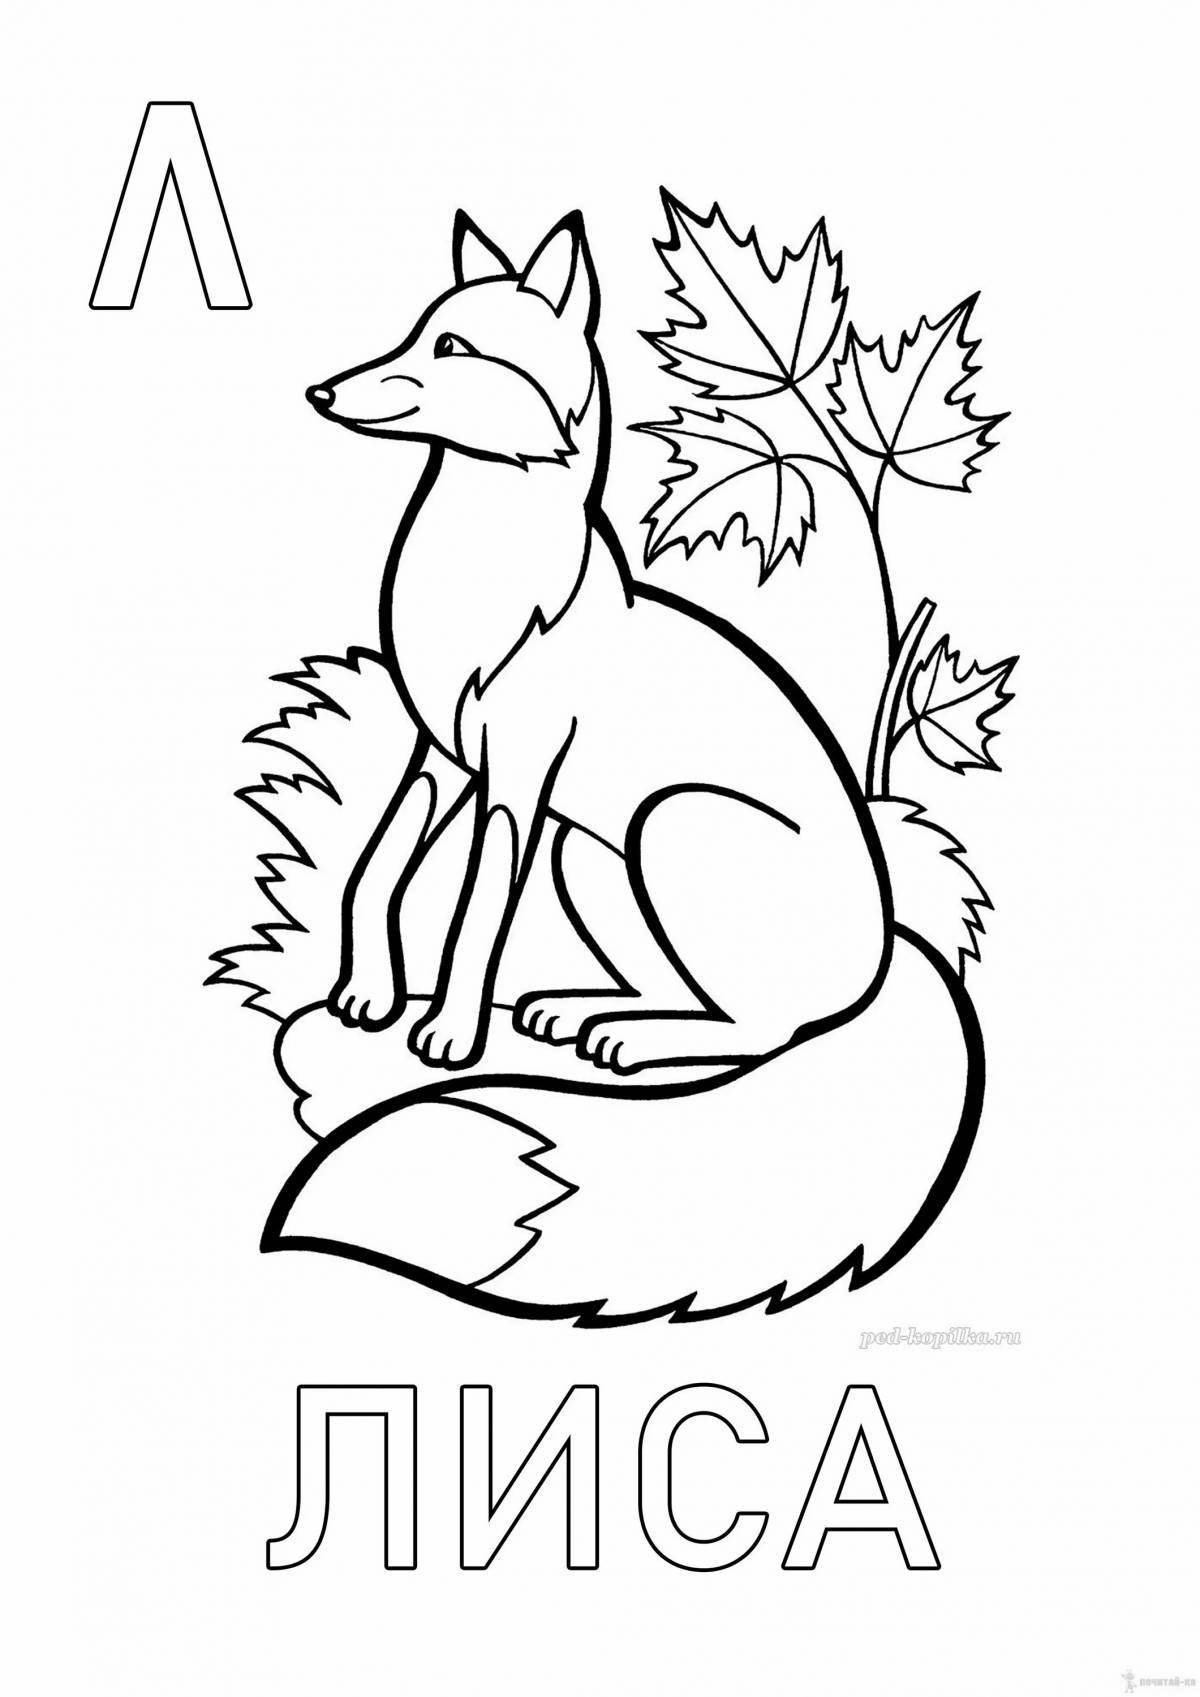 Fat fox coloring book for kids